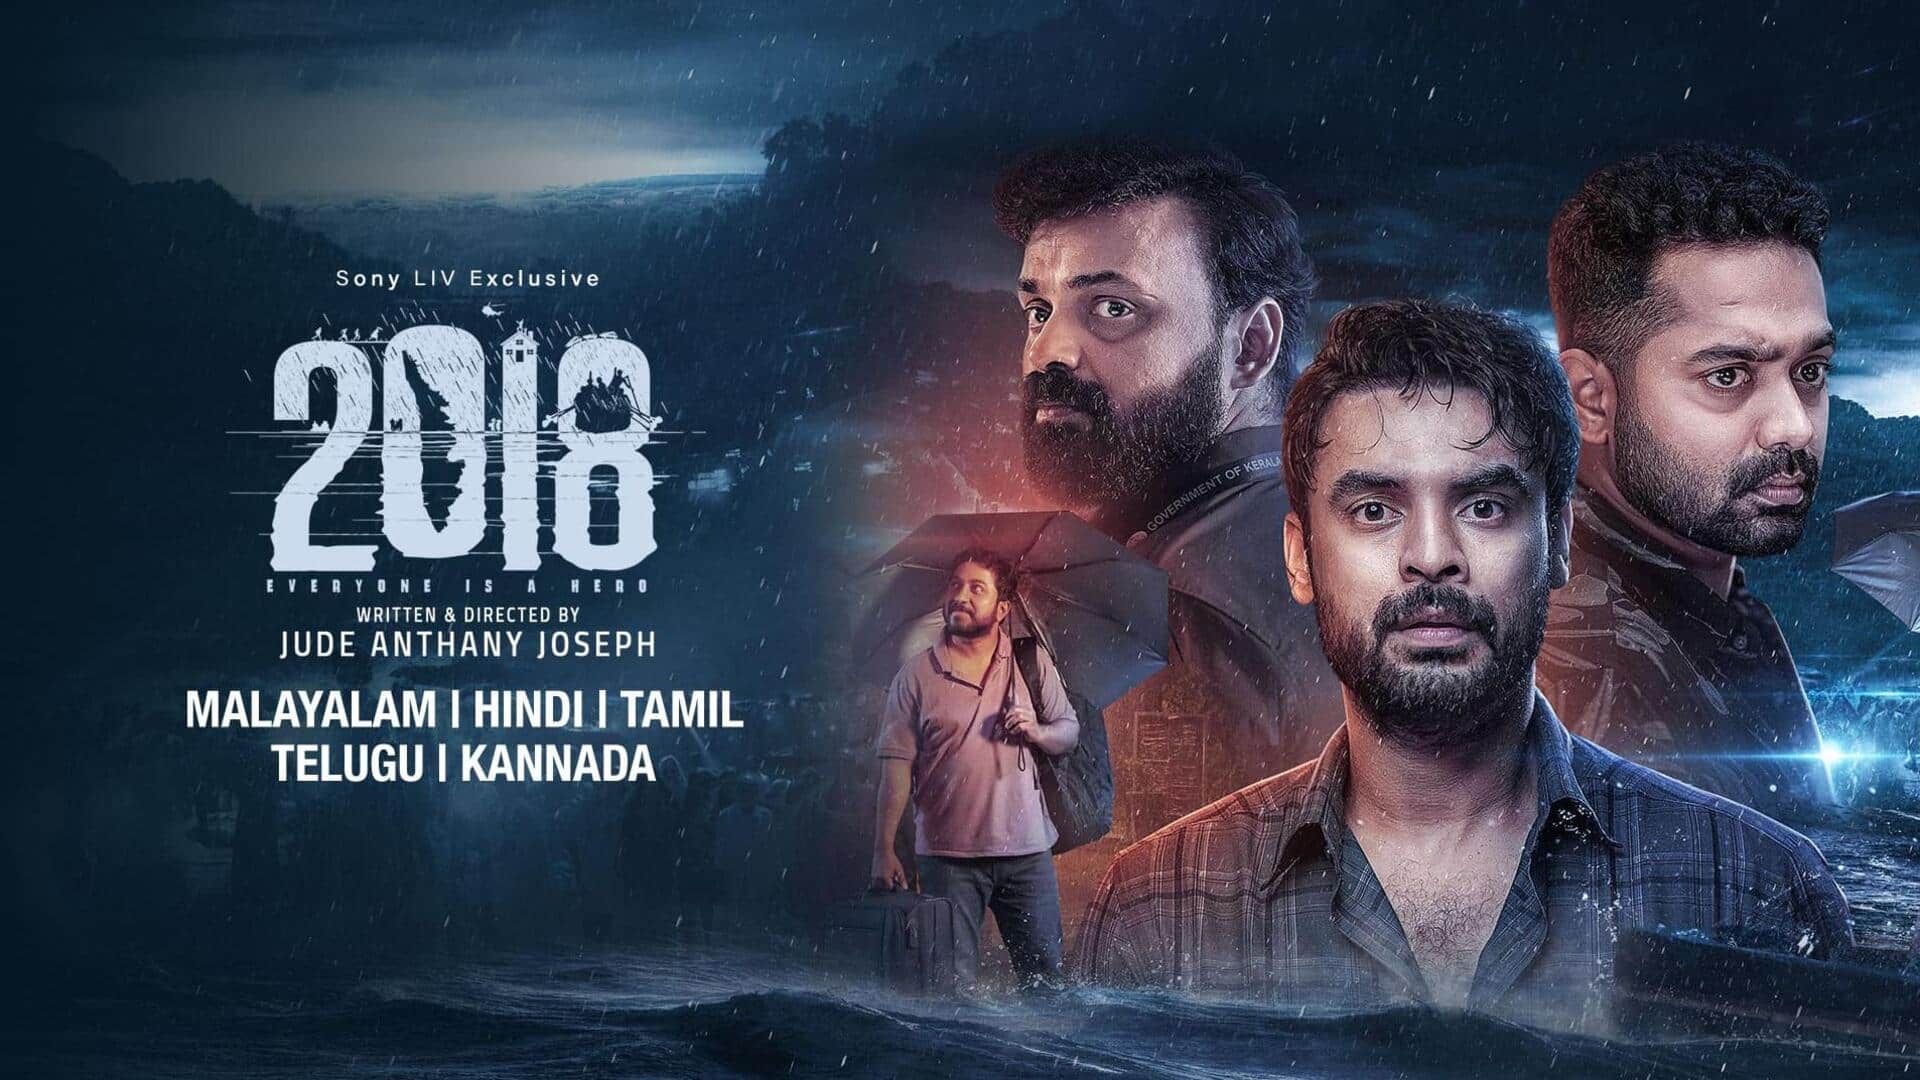 Malayalam film '2018' becomes India's official entry for Oscars 2024